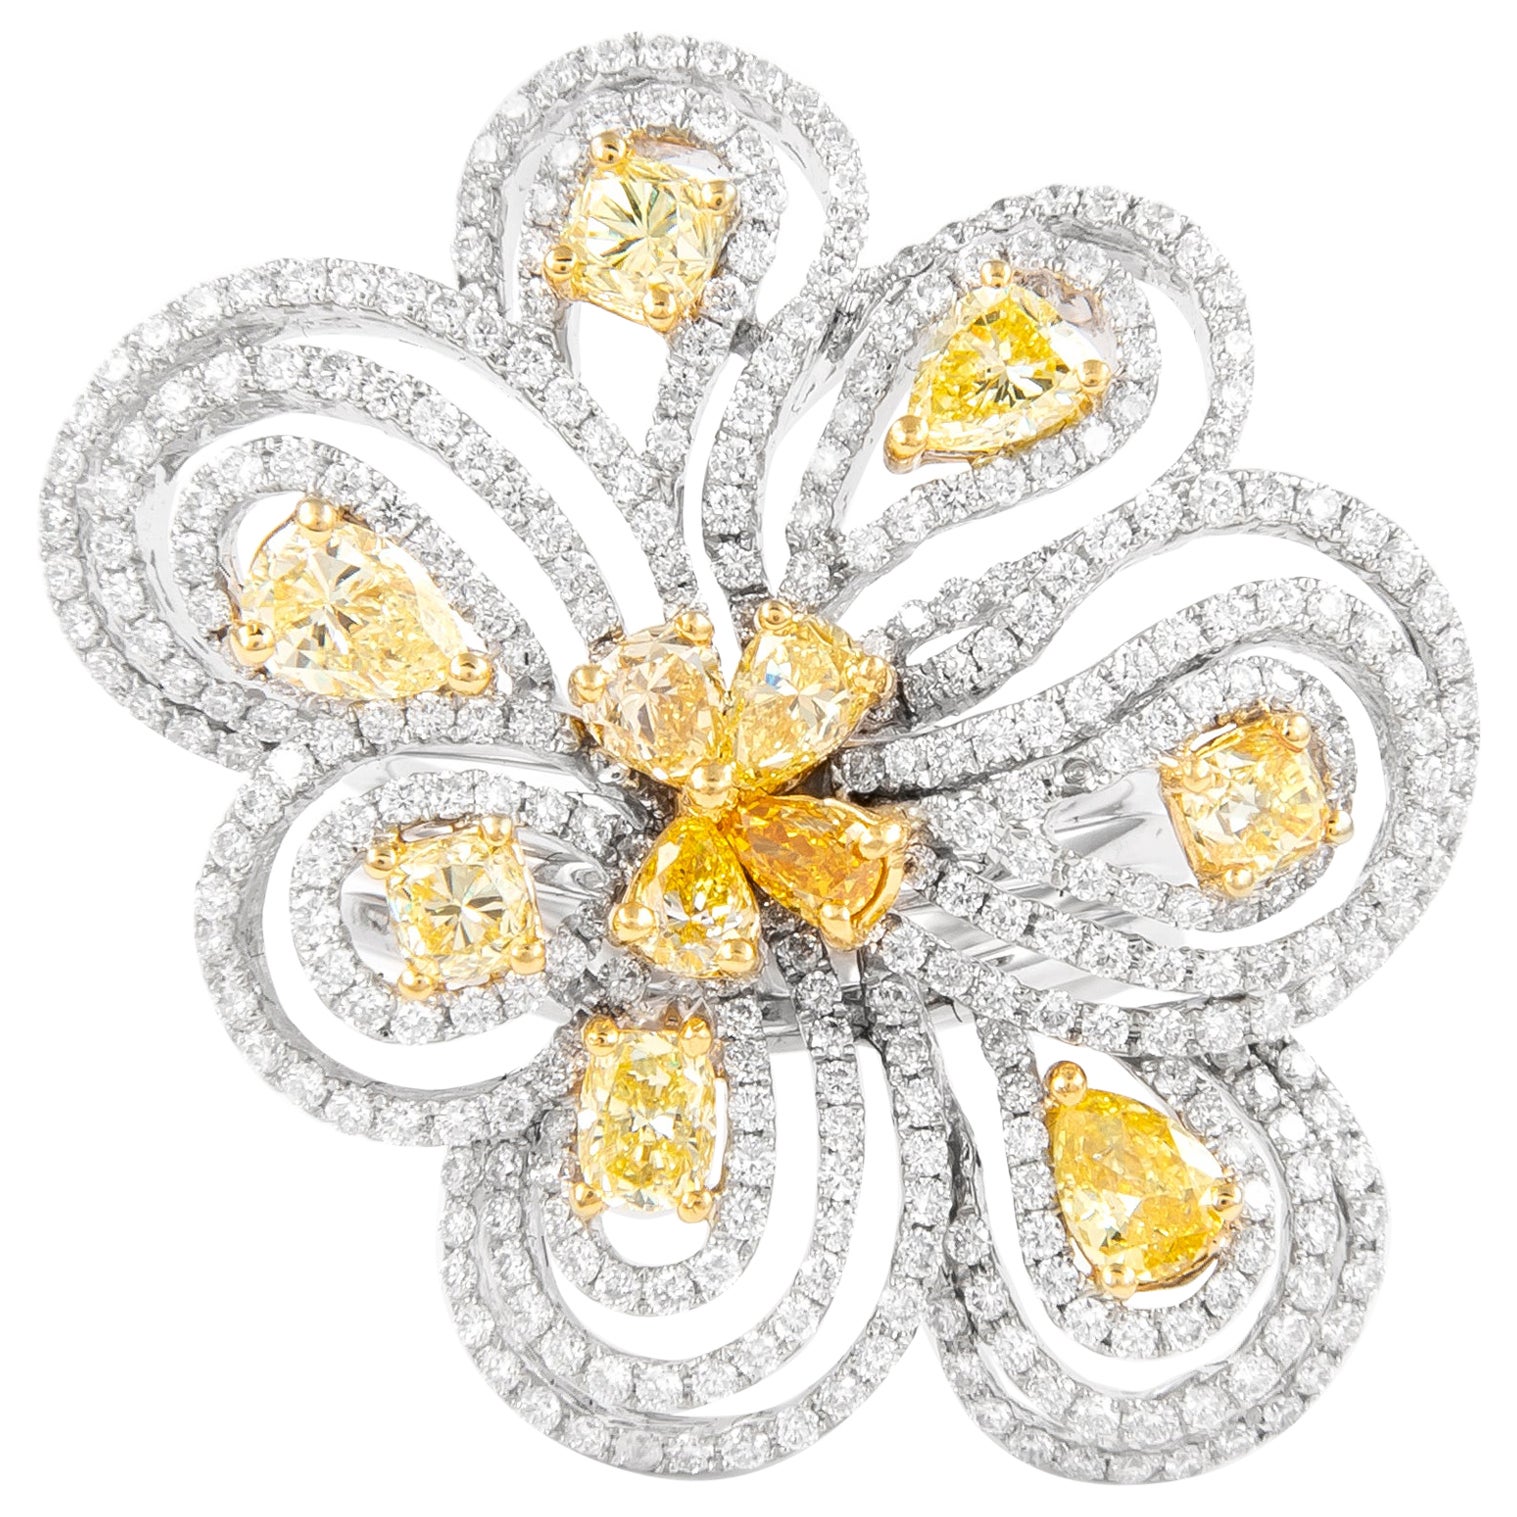 Alexander 3.97ctt Yellow Diamond & Diamond Floral Ring 18k Two Tone Gold For Sale